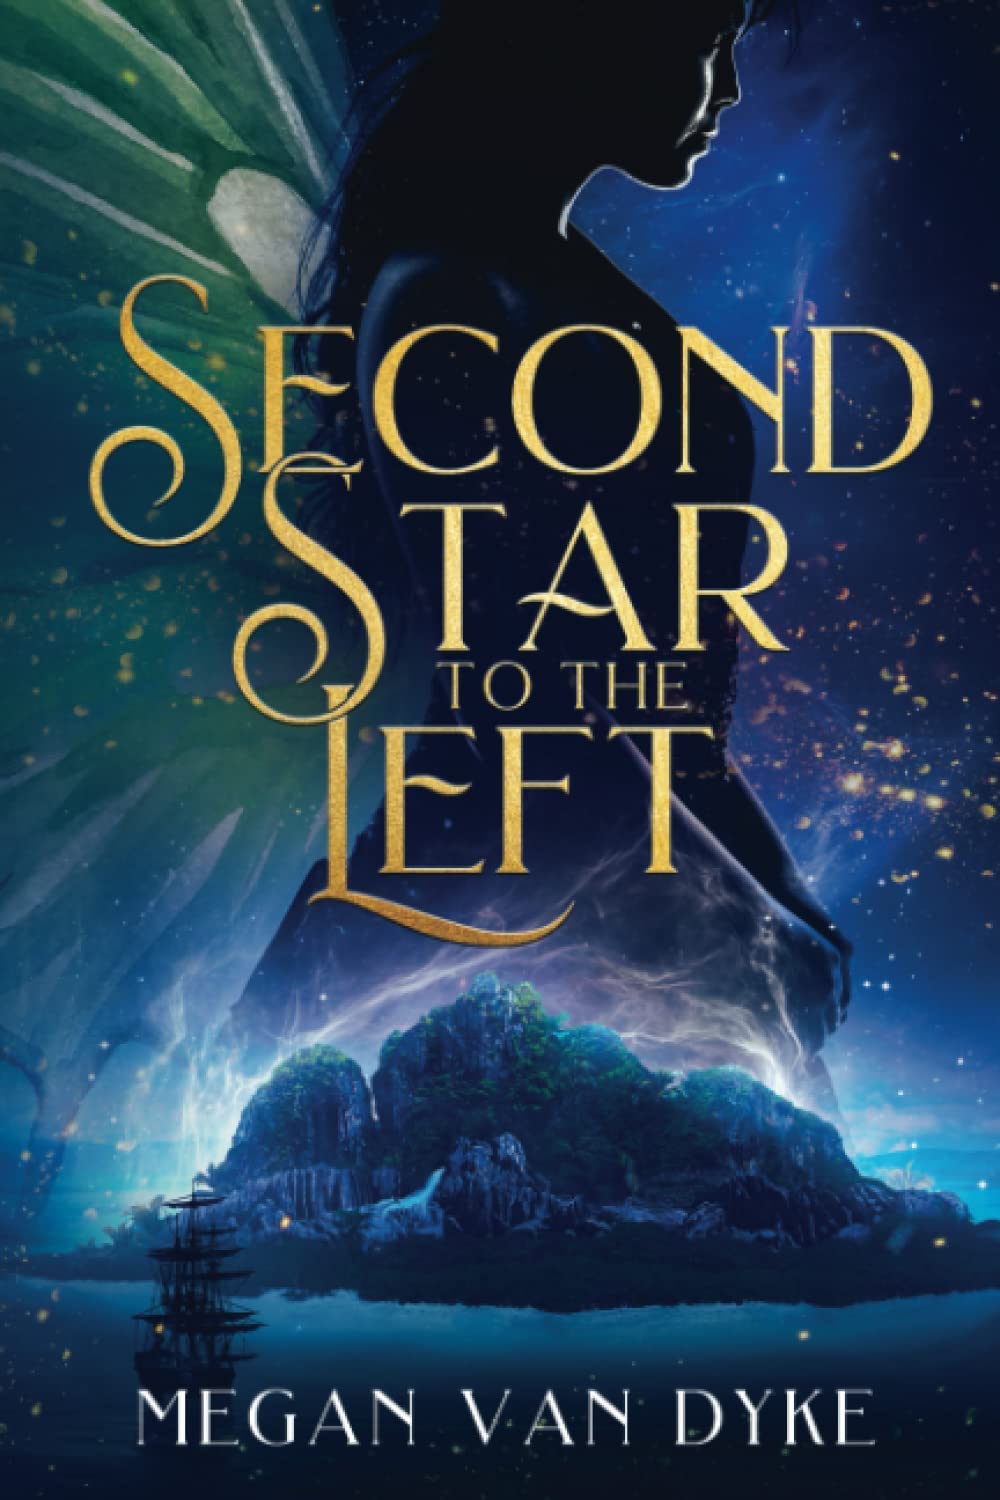 Second Star to the Left by Megan Van Dyke